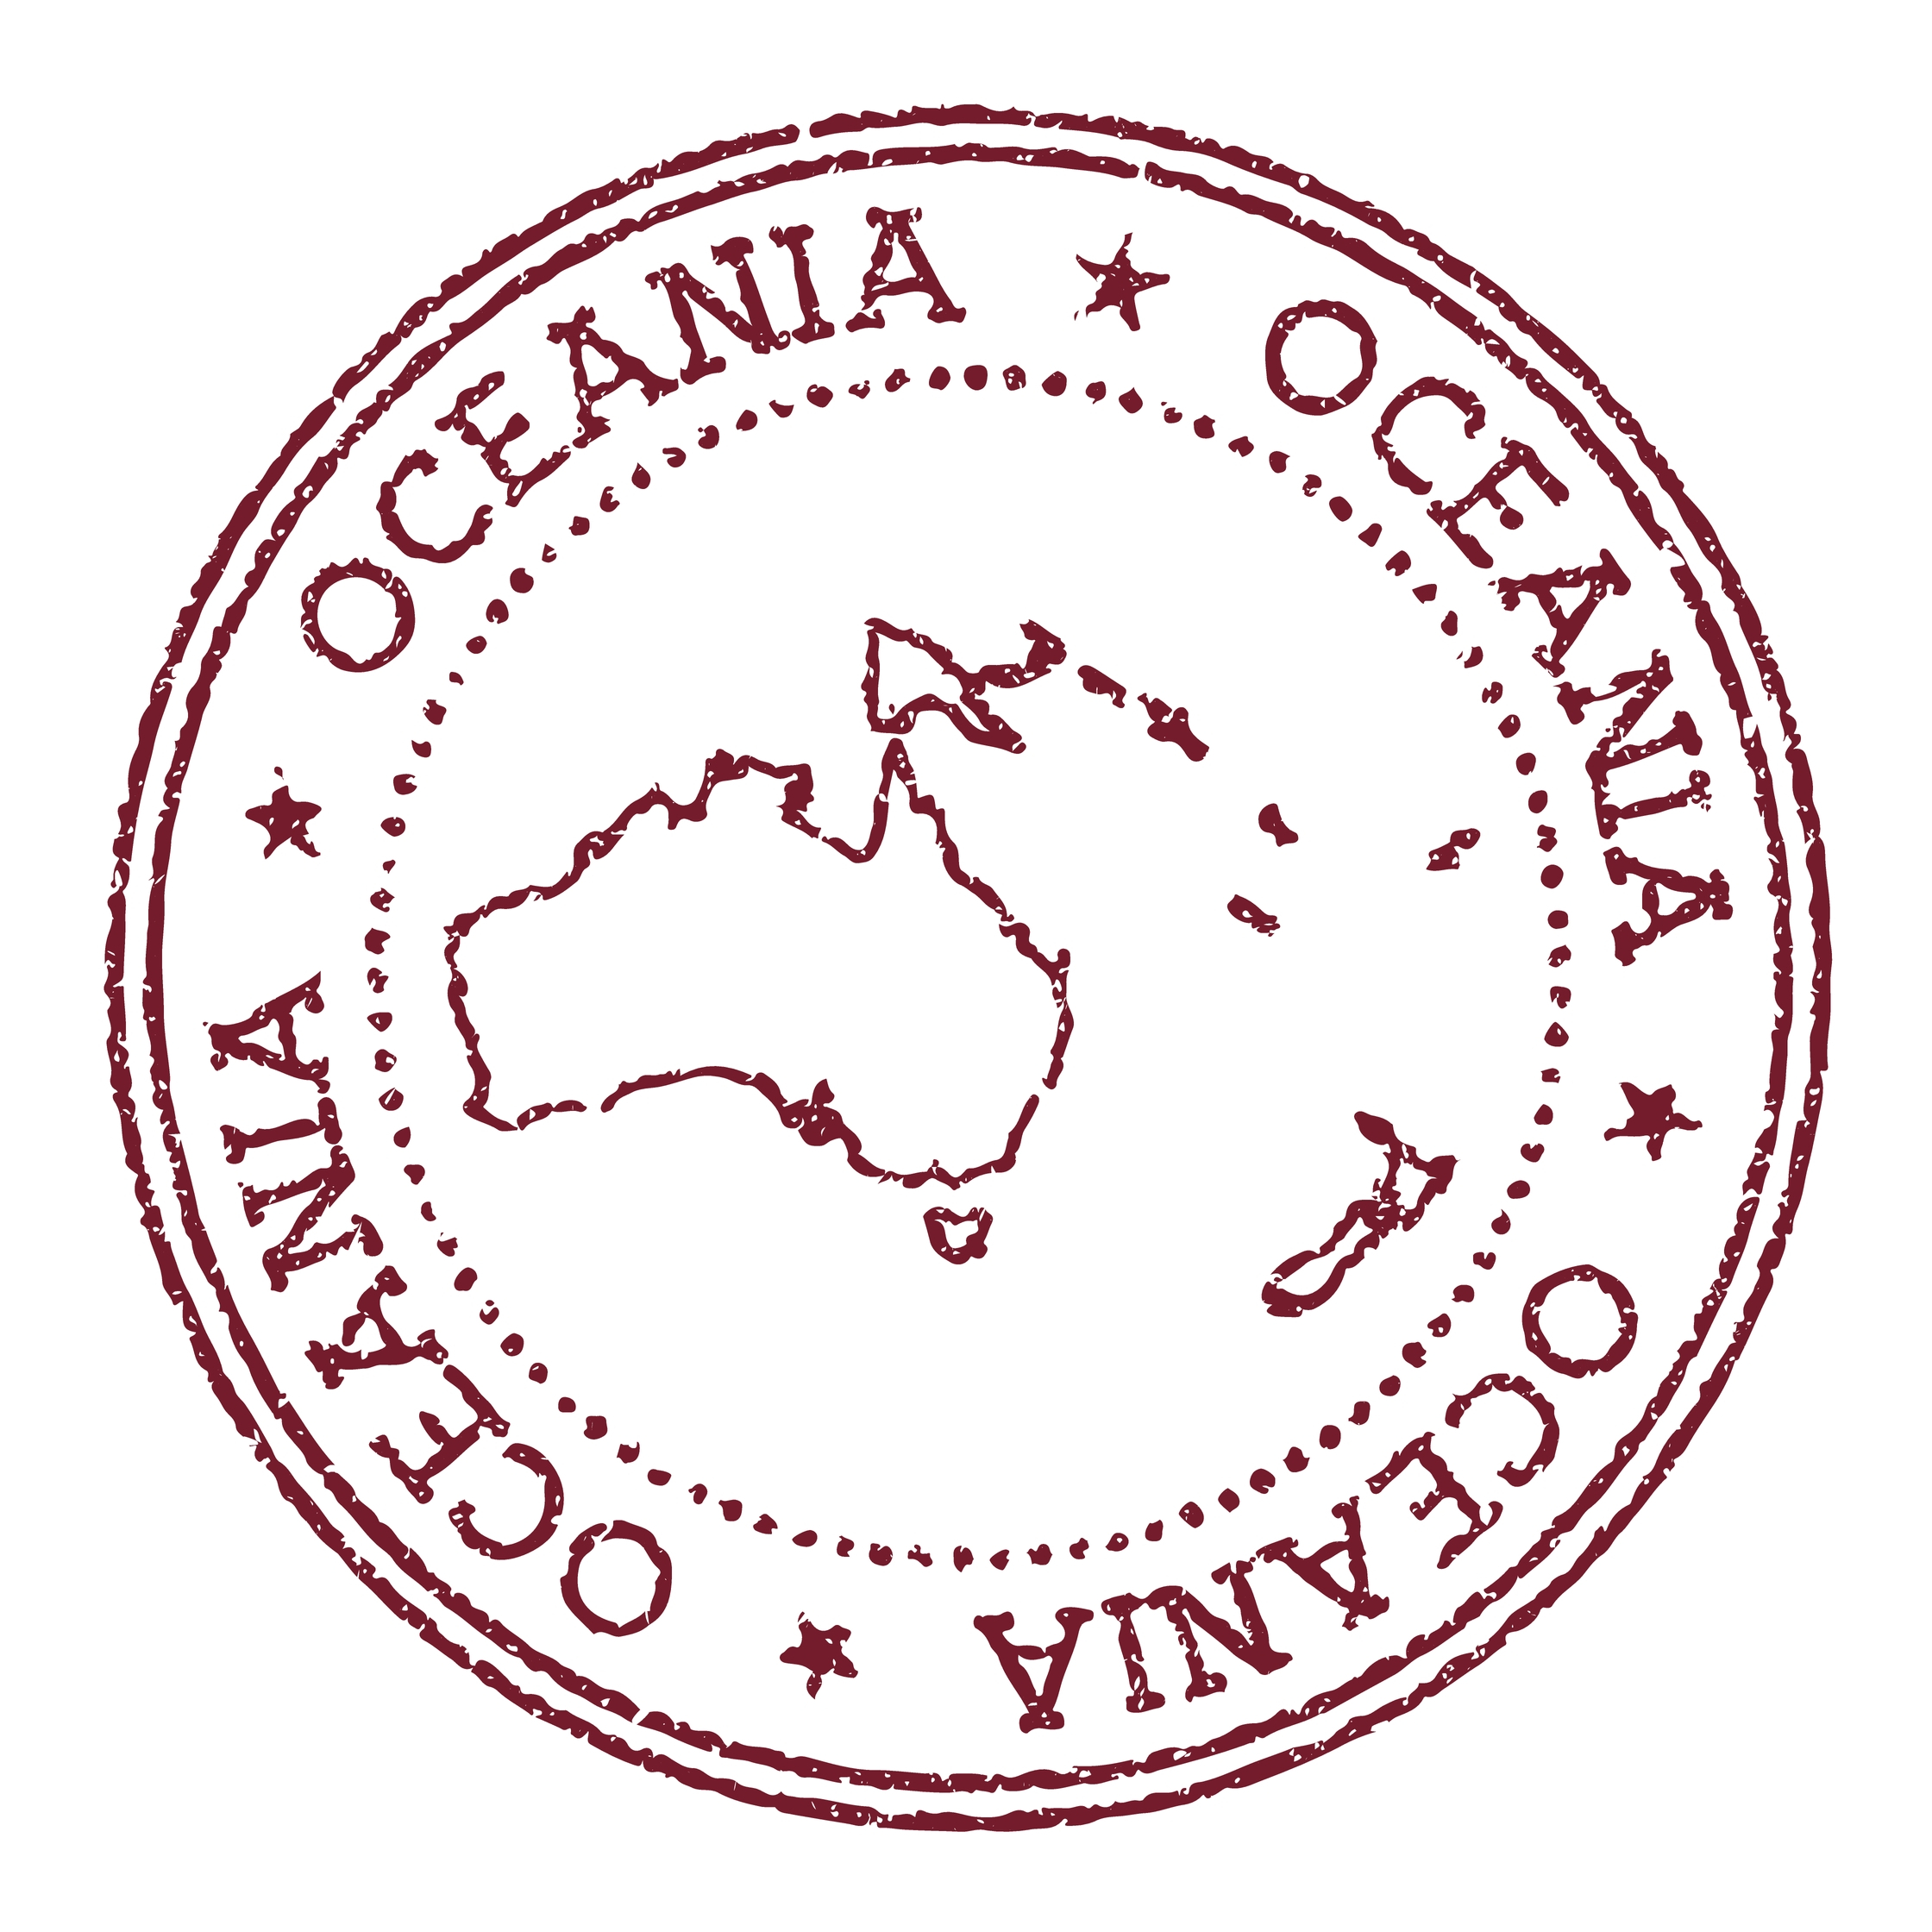 Destinations Round Rubber Postage Stamp, with an outline of the continent in the centre, and the word Oceania written around the edge of the circle.